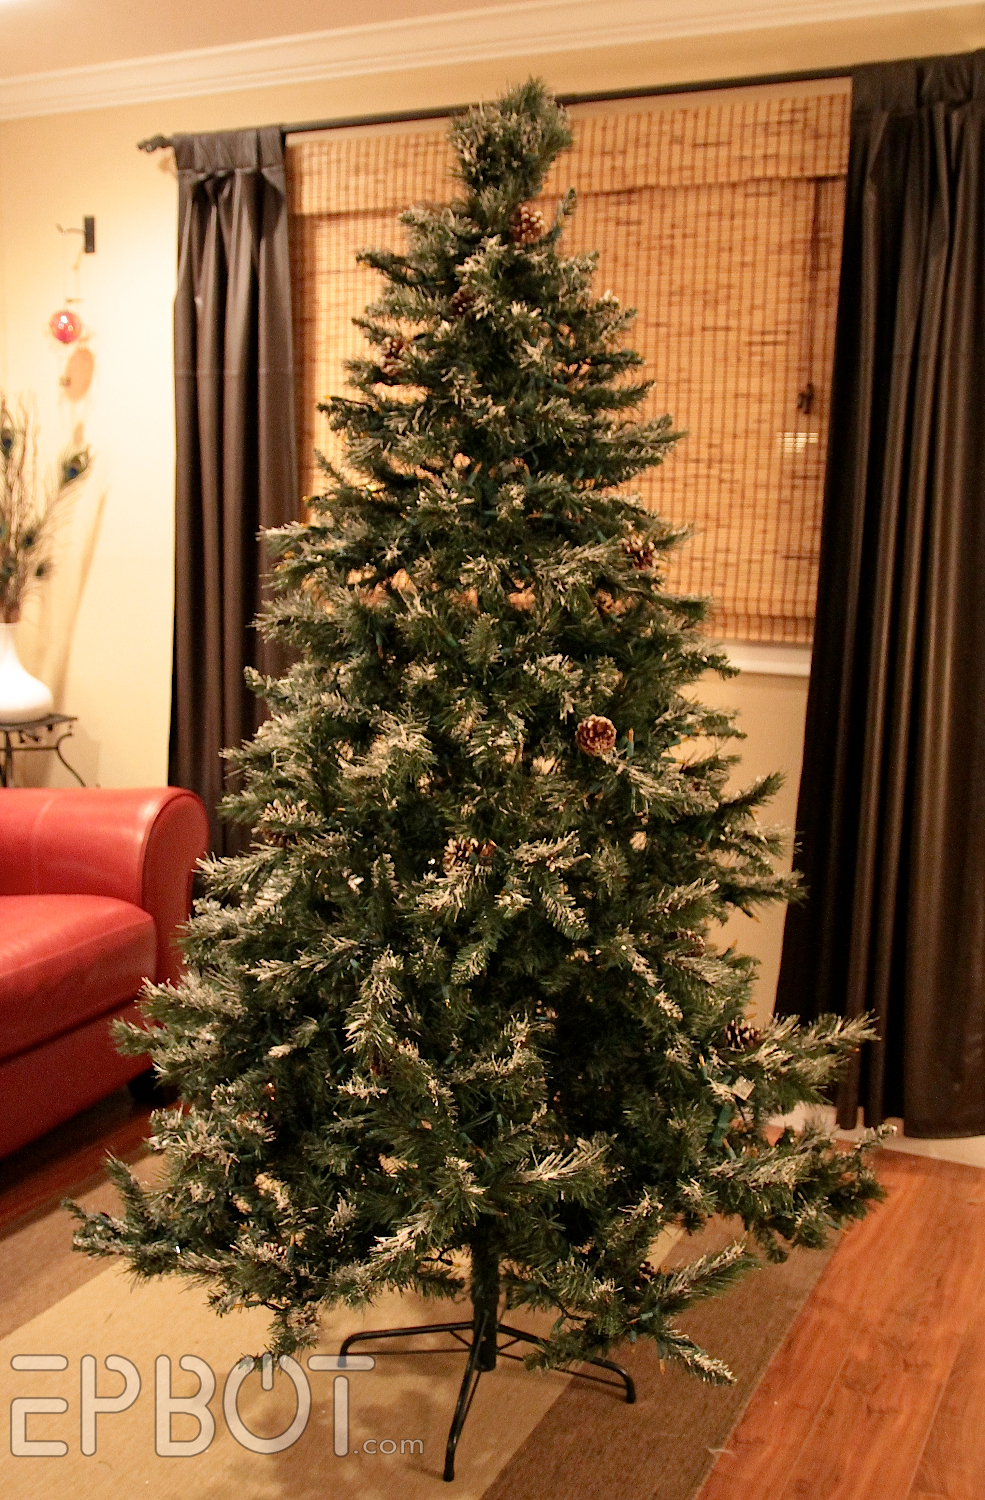 How To Wrap Christmas Tree EPBOT: How To Shrink-Wrap Your Christmas Tree For Fun & Profit!